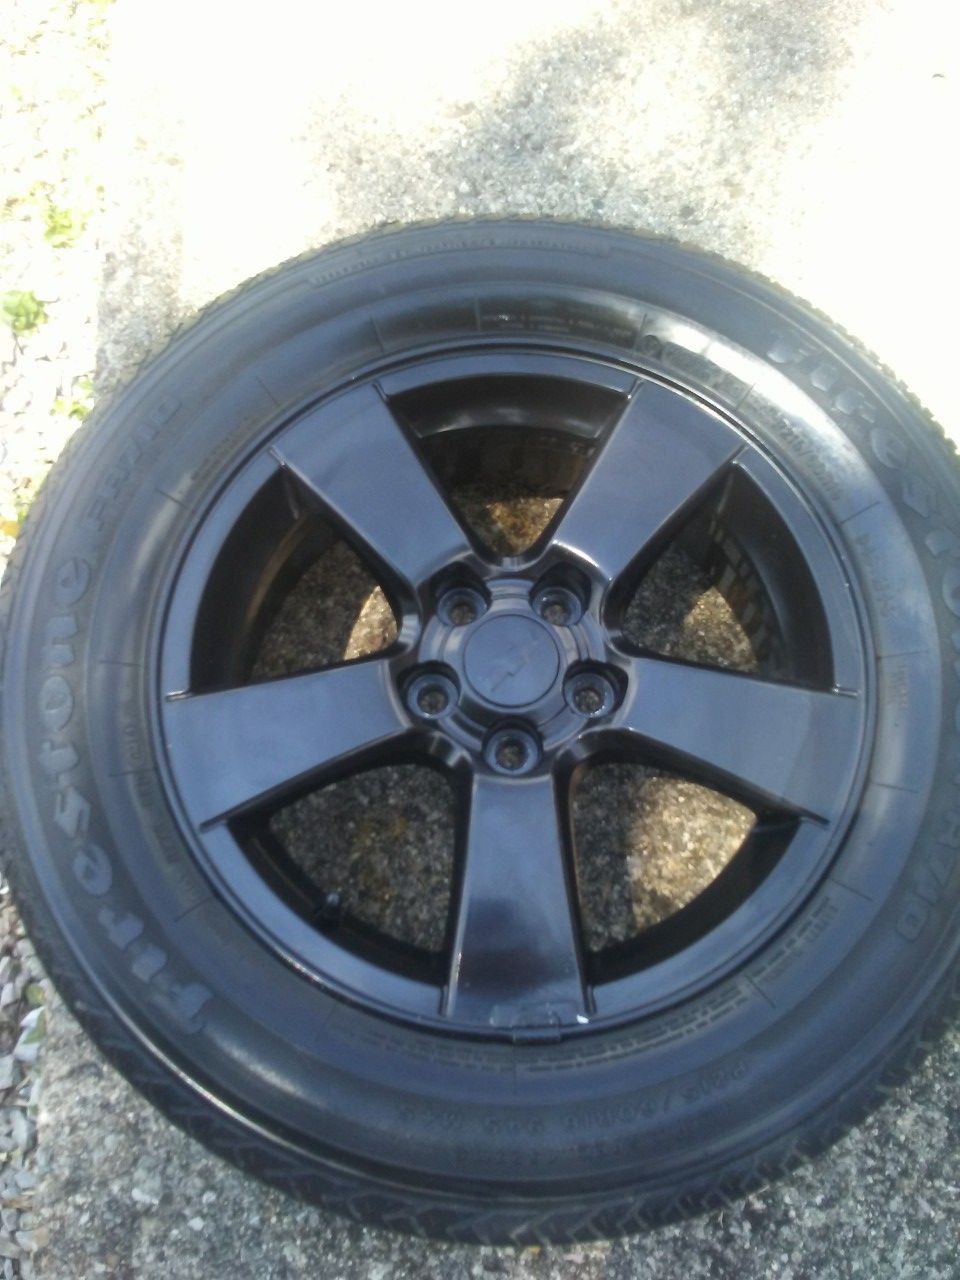 Stook rims off 2014 chevy cruze painted black